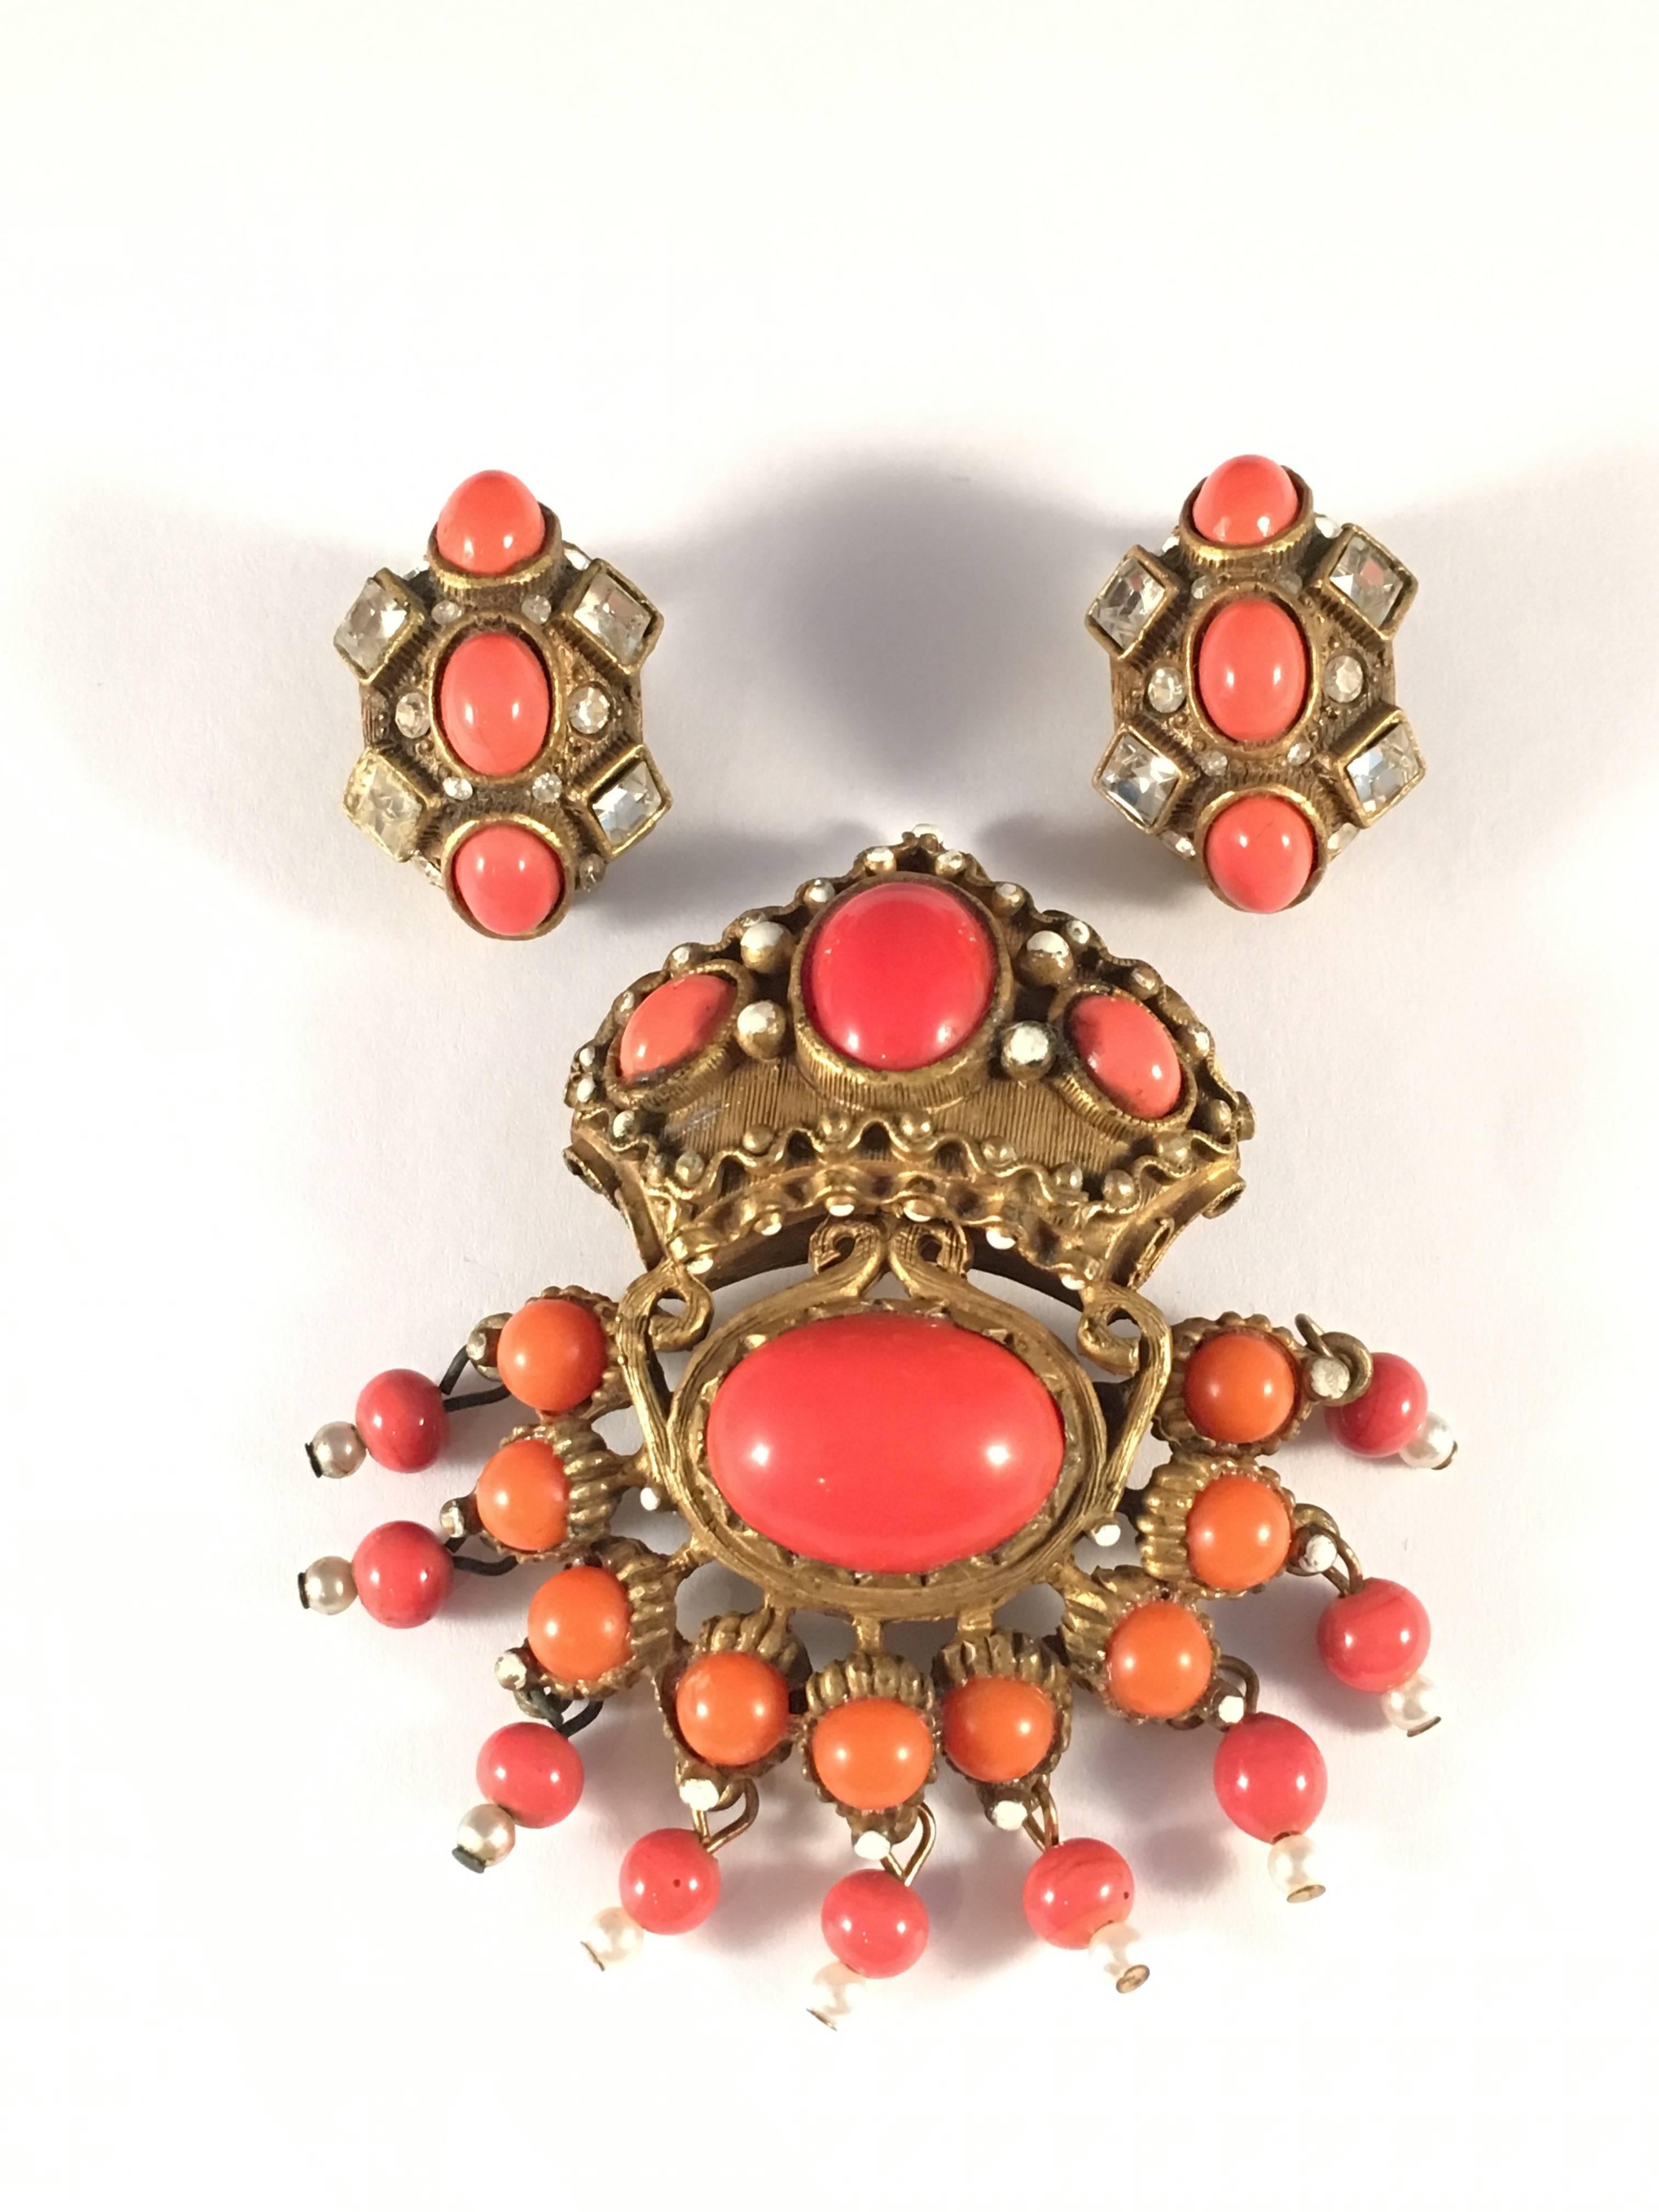 This is a rare and collectible 1960s Kenneth Jay Lane brooch and earrings set. It is designed with coral colored glass stones set in an antiqued gold-tone setting. The brooch has dangling coral beads with a smaller faux pearl dangling at the end of